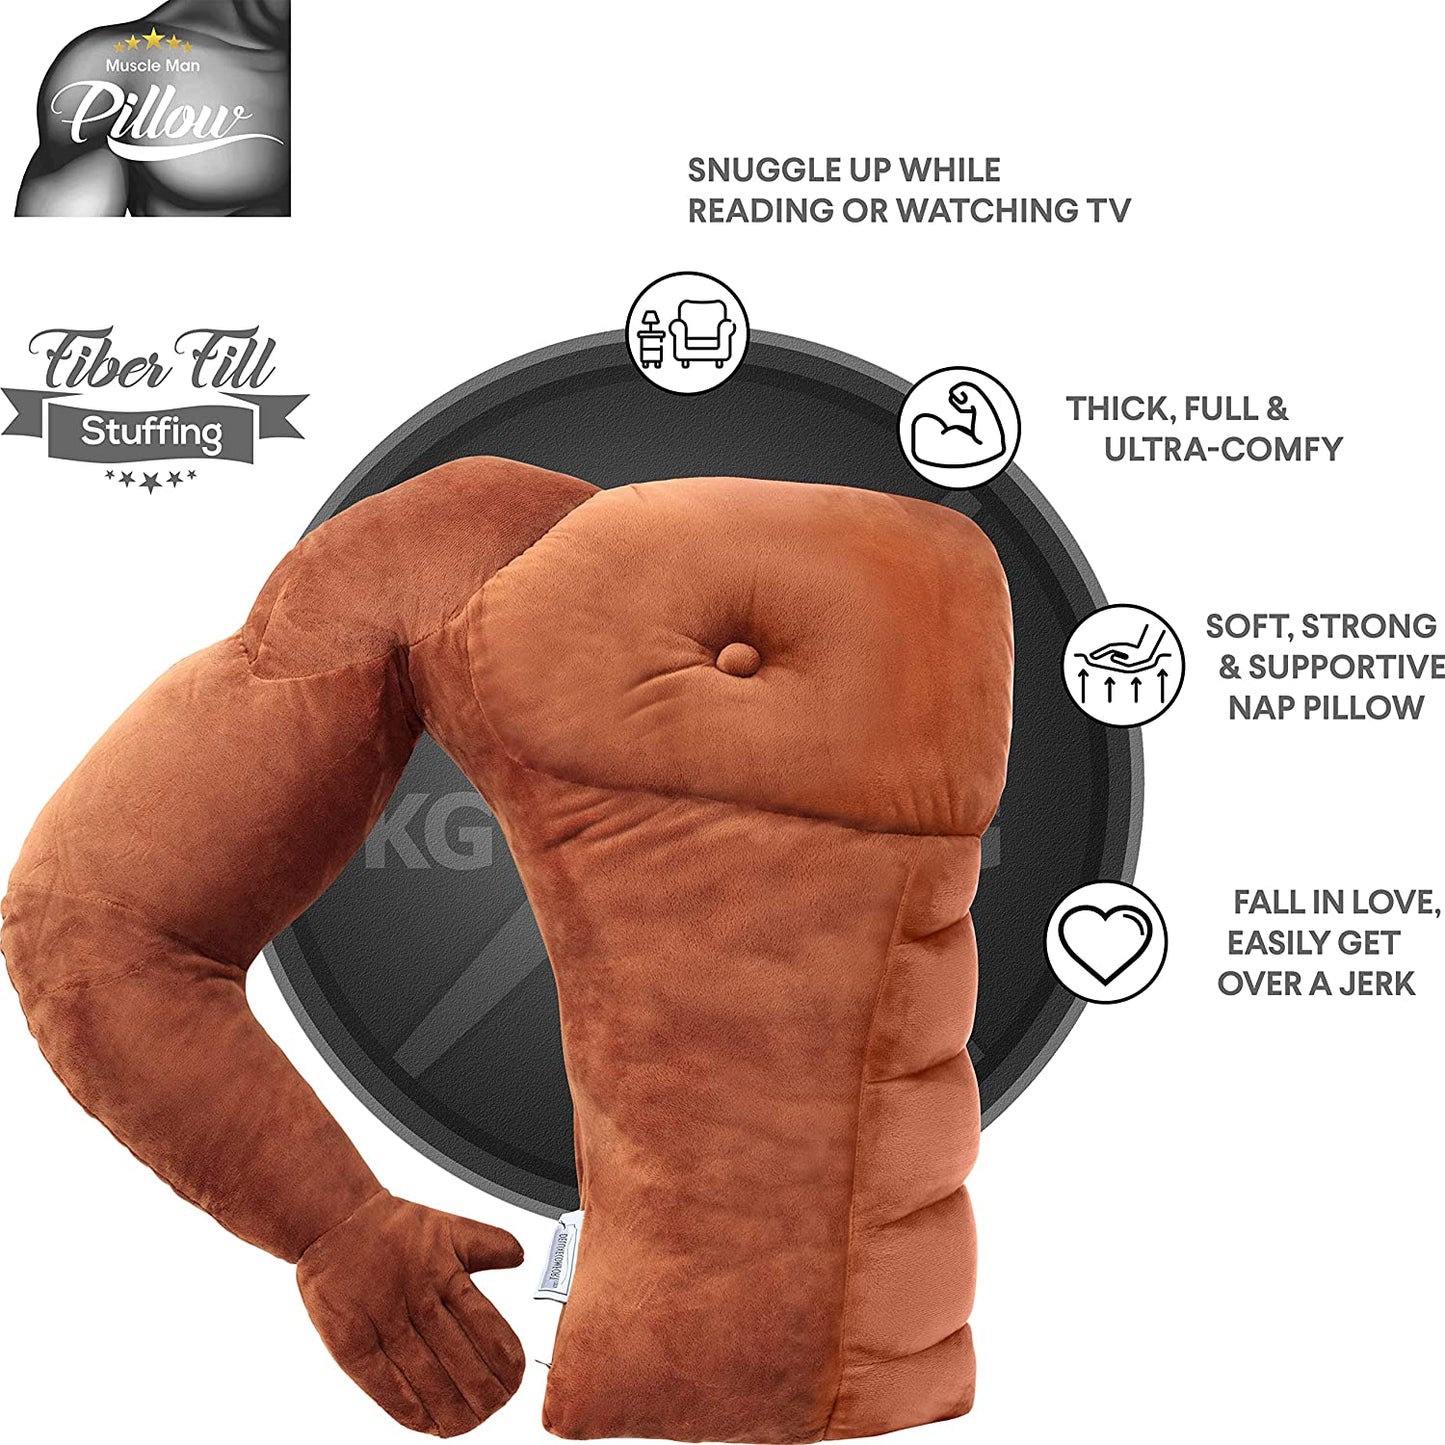 Detailed product features for a muscle man pillow. The text reads, 'Snuggle up while reading or watching TV. Thick, full and ultra-comfy. Soft, strong and supportive nap pillow.'